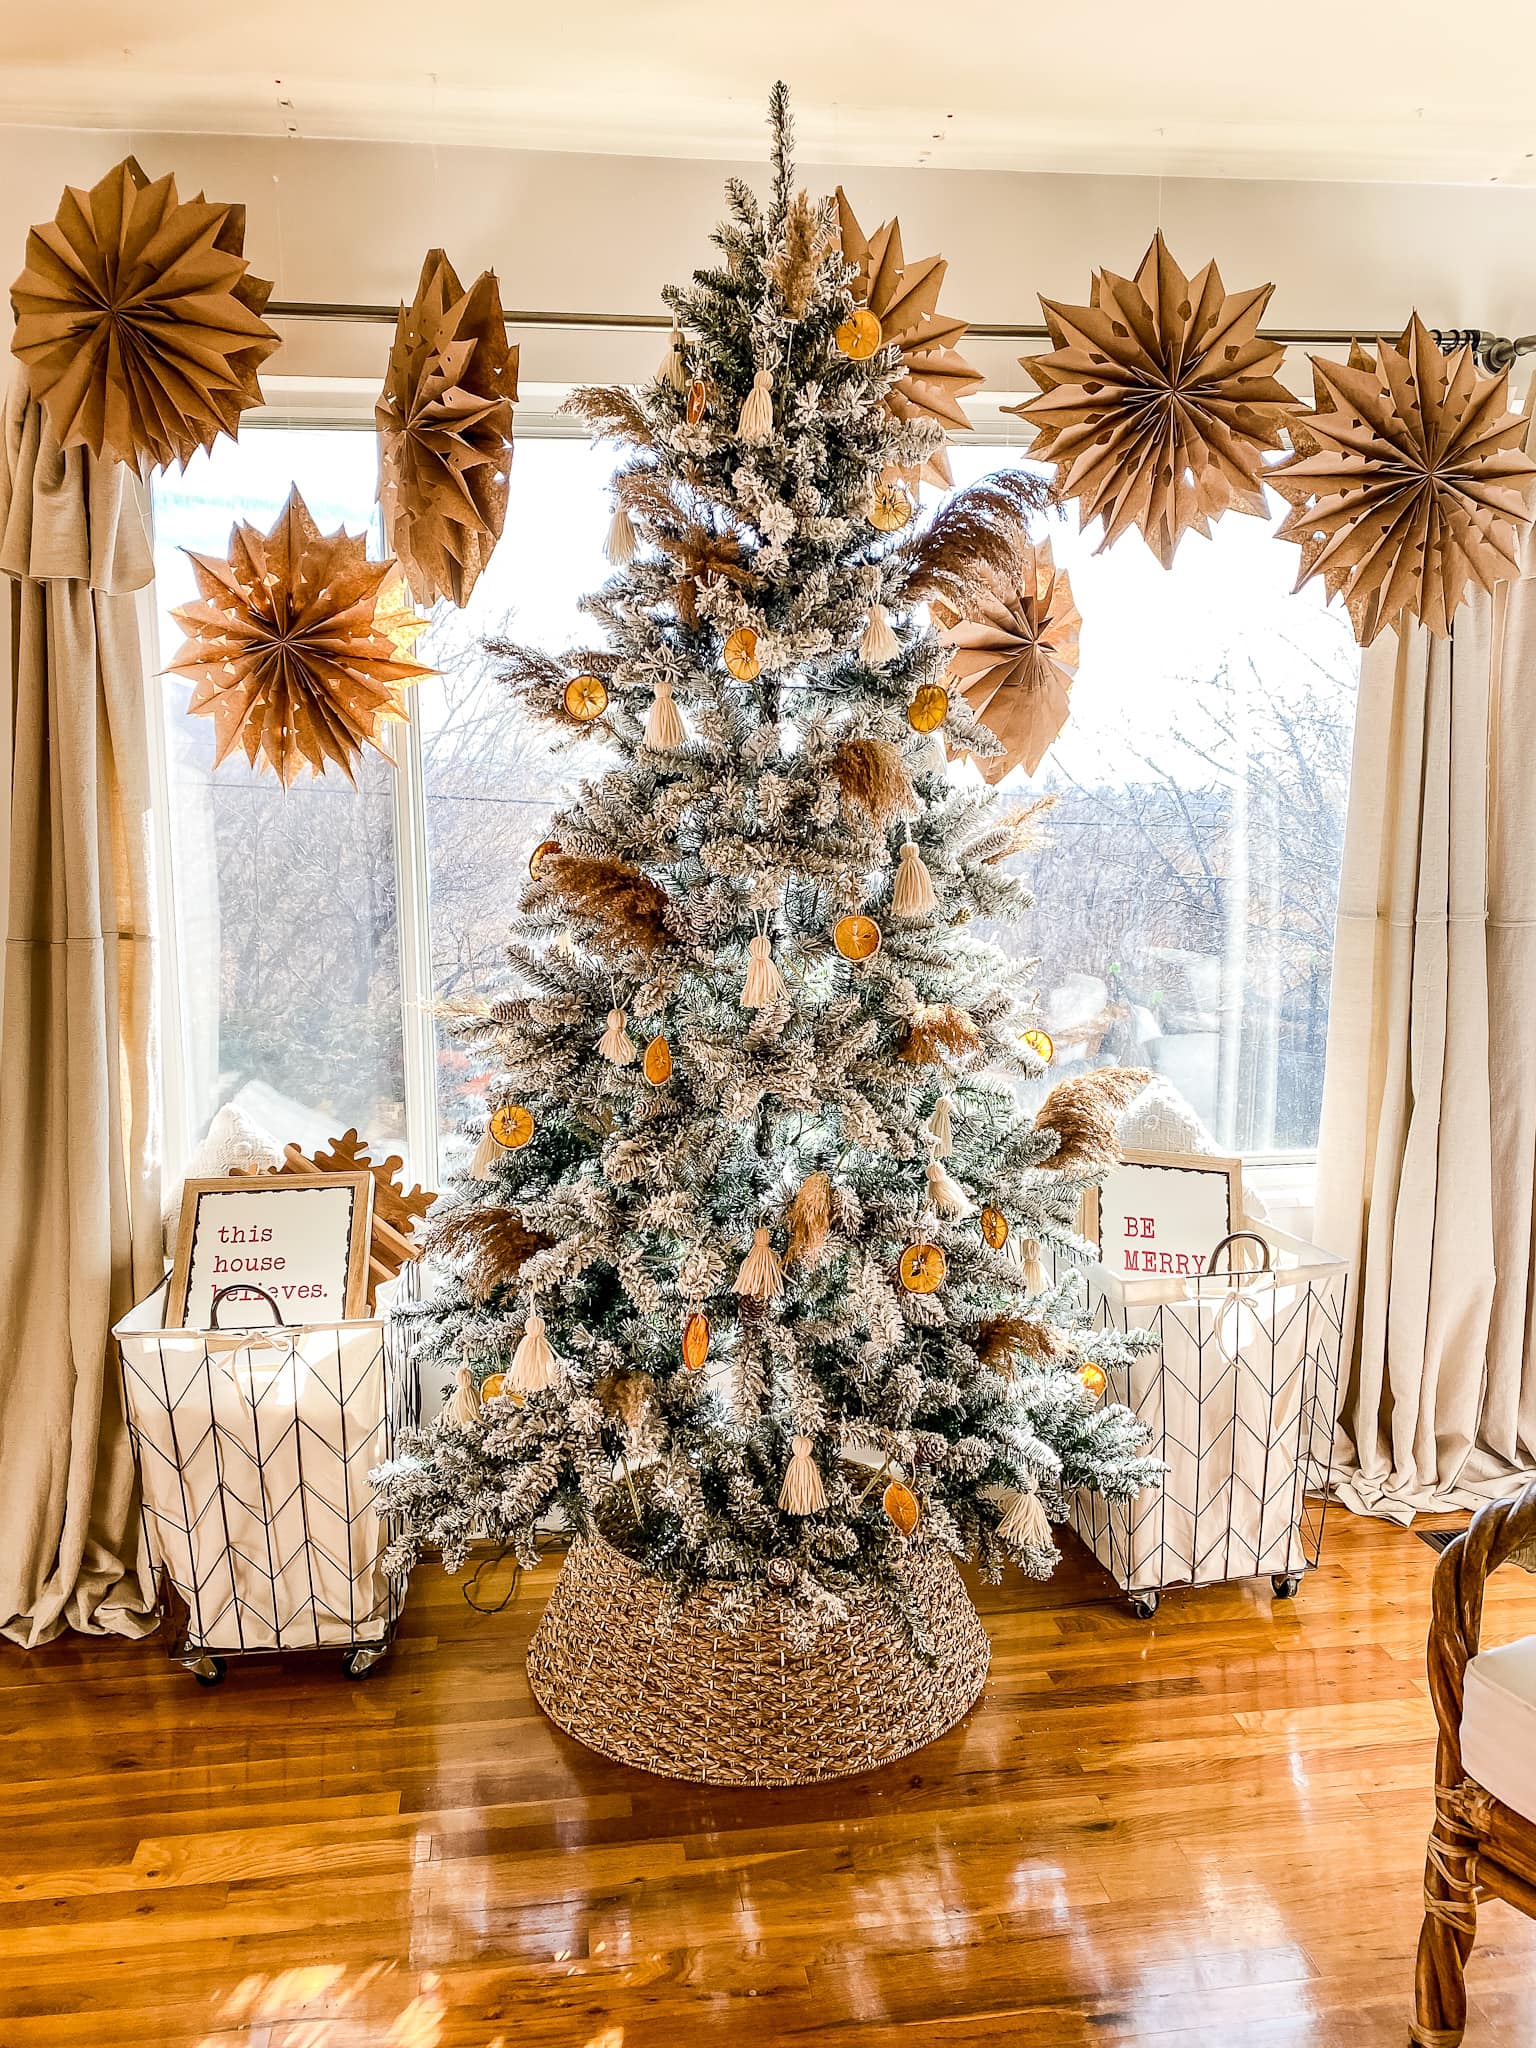 5 farmhouse Christmas tree ideas to steal from our favorite rustic